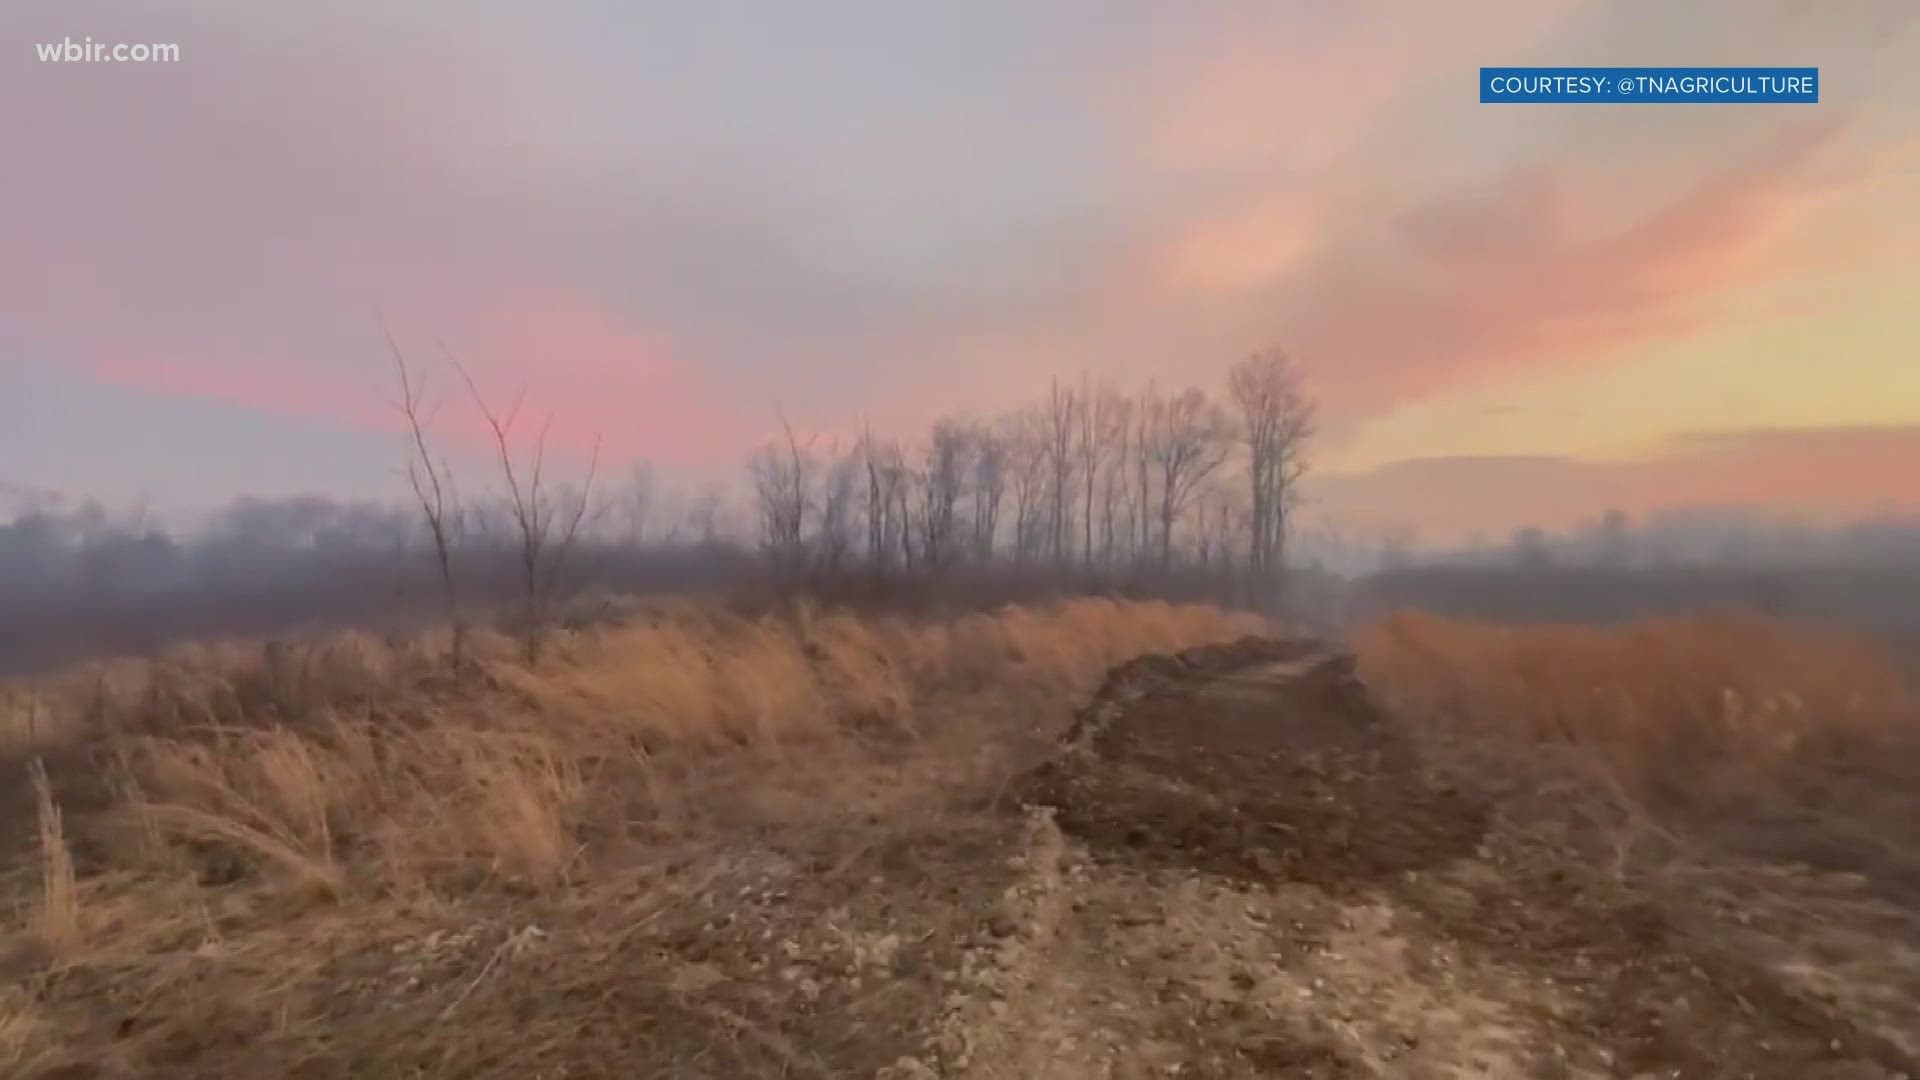 in Fentress county, authorities said the 1,000 acre fire is now 85 percent contained.